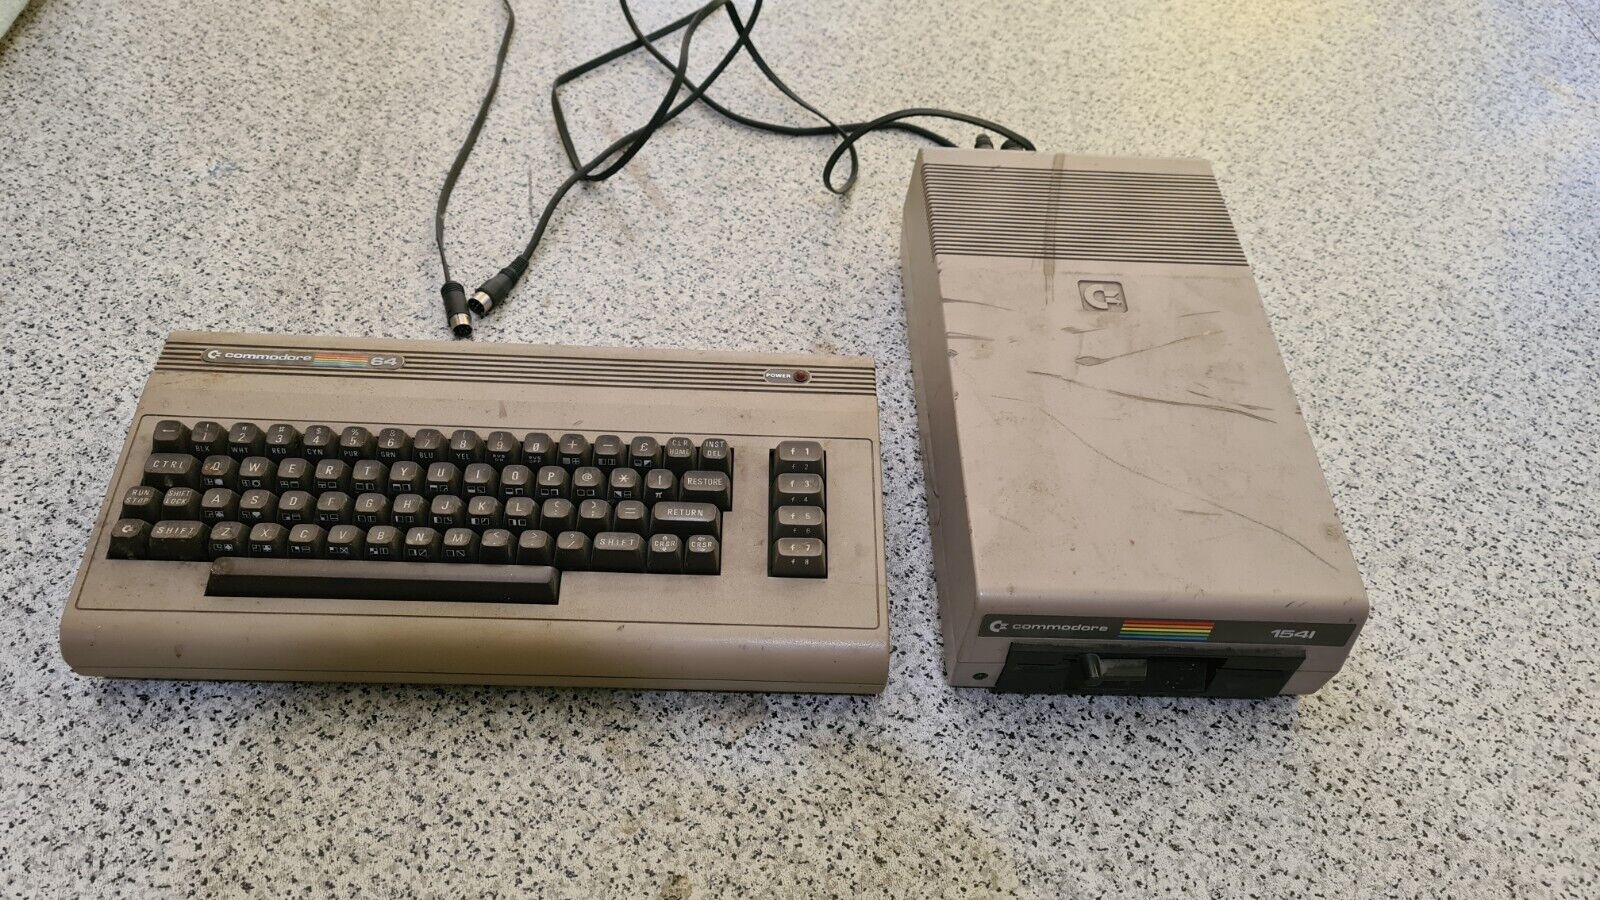 Commodore 64 and 154l FDD Vintage Computer Made in West-Germany in late 80's